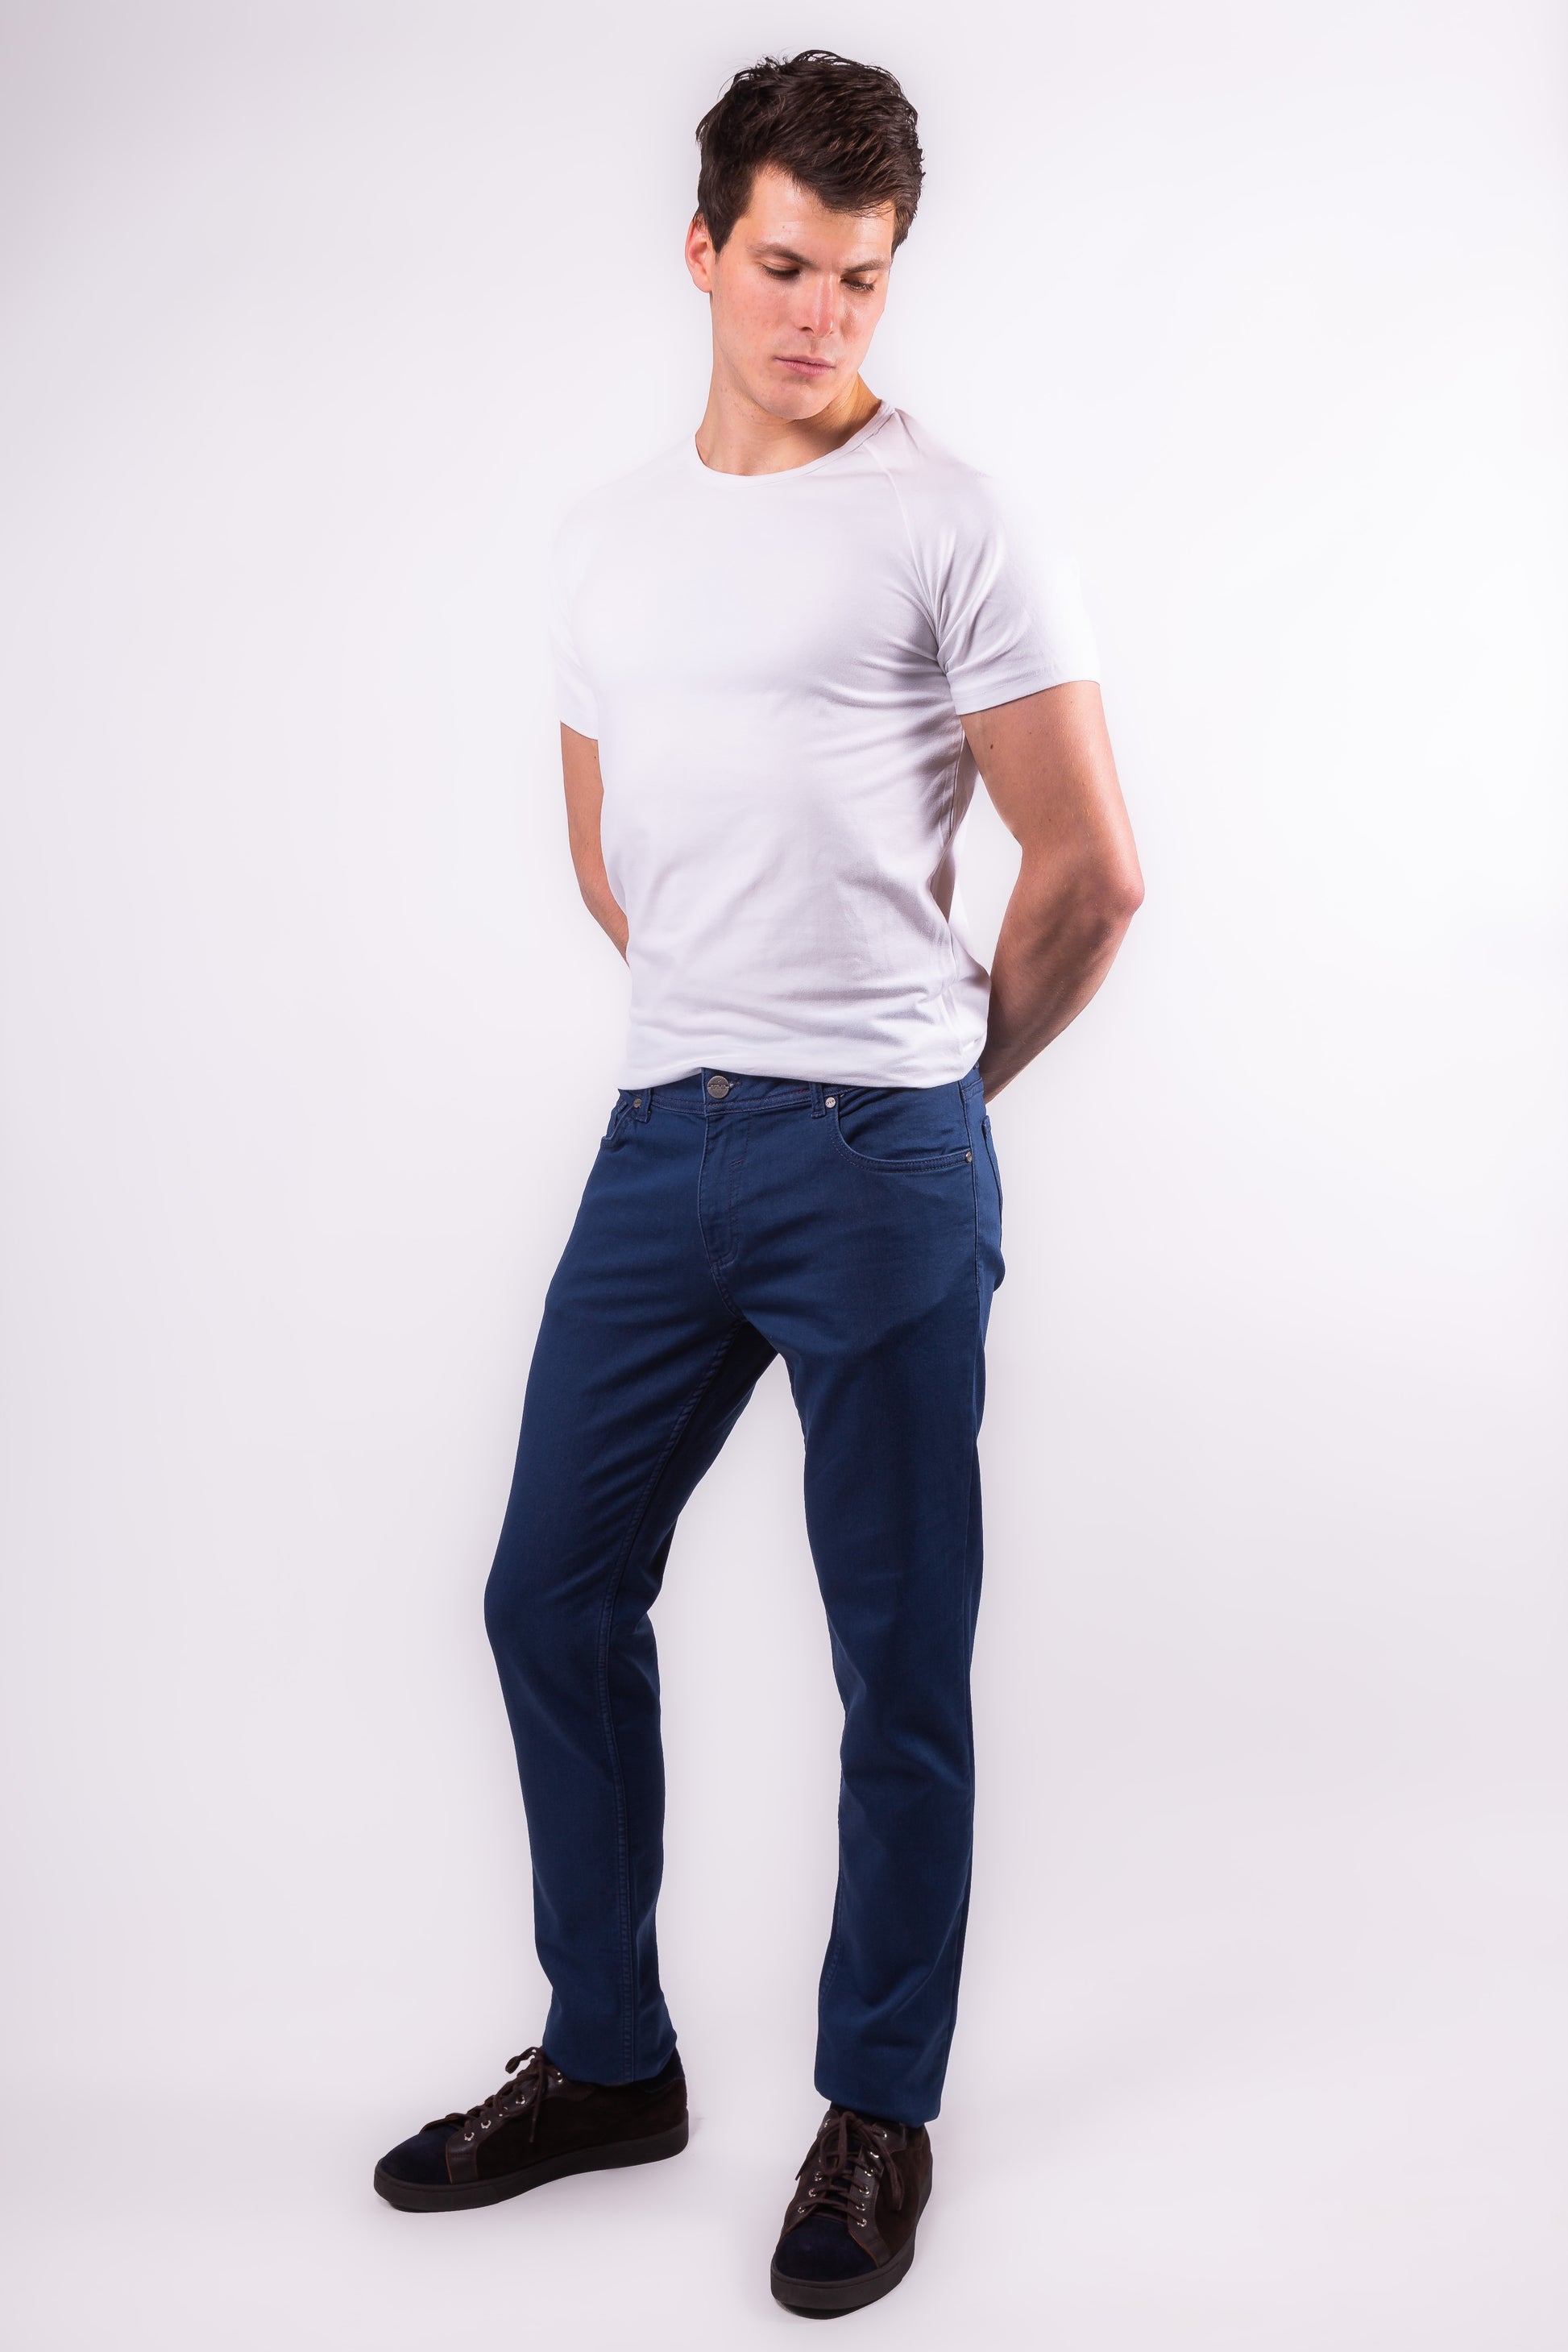 With a comfortable, stretchy cotton like no other, the Forester model from DFR89 is a great pair of men's premium light bue denim jeans for any occasion.